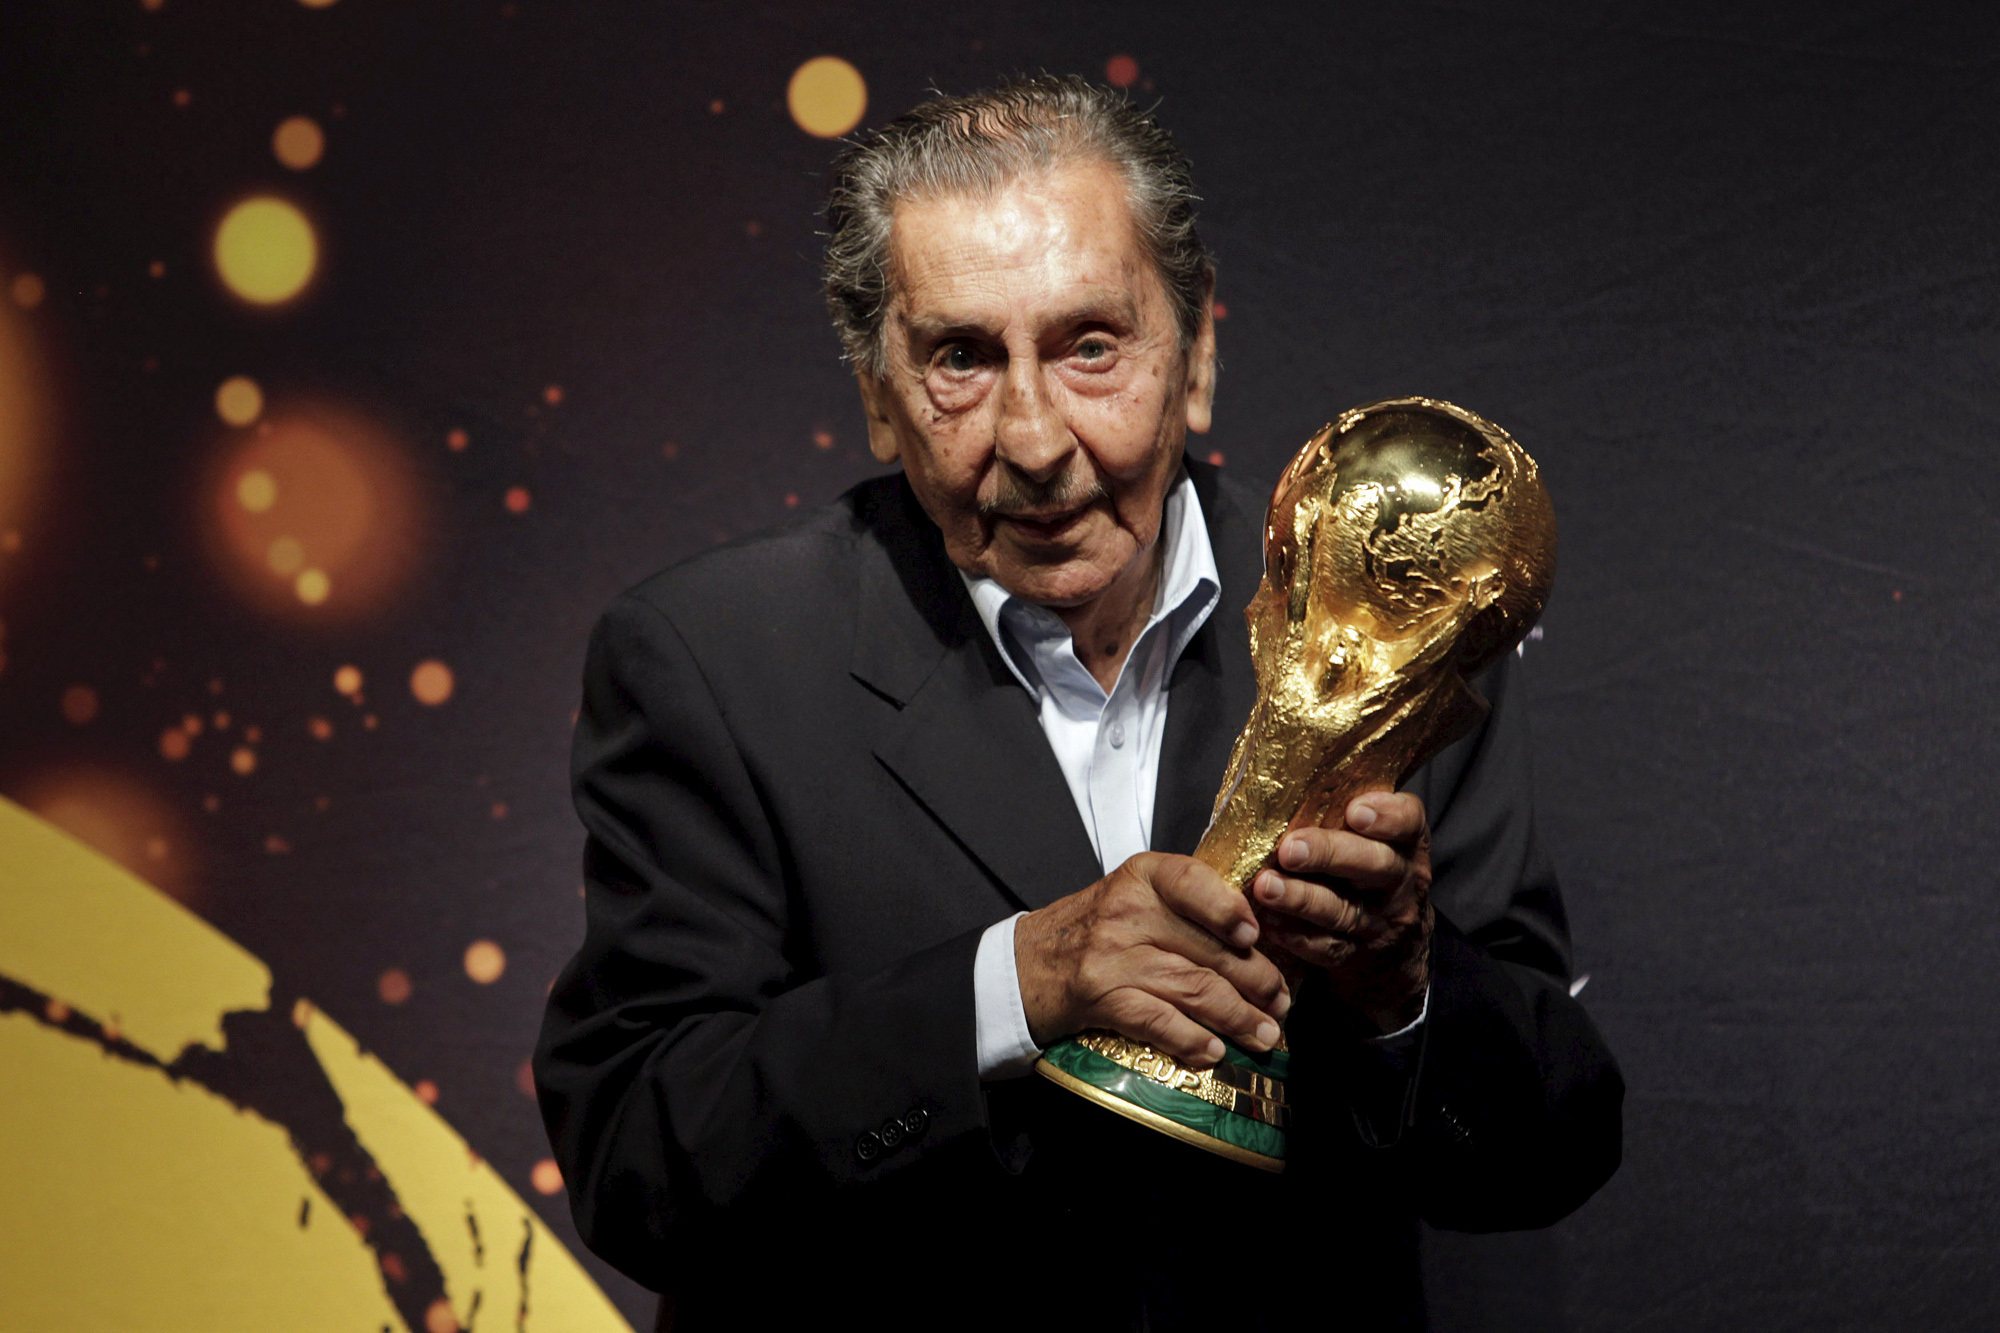 Former Uruguayan soccer player Alcides Ghiggia, famed for his role in the final 1950 World Cup match between Uruguay and Brazil, poses with the FIFA World Cup trophy during the 2014 FIFA World Cup Trophy Tour in Montevideon in this January 16, 2014 file picture.  Ghiggia, who scored the legendary goal for the Uruguayan national team to win the 1950 World Cup , died at the age of 88 on July 16, 2015 of a heart attack, local media reported on the 65th anniversary of the conquest that silenced the Maracana. Picture taken July 16, 2014.  REUTERS/Andres Stapff/Files